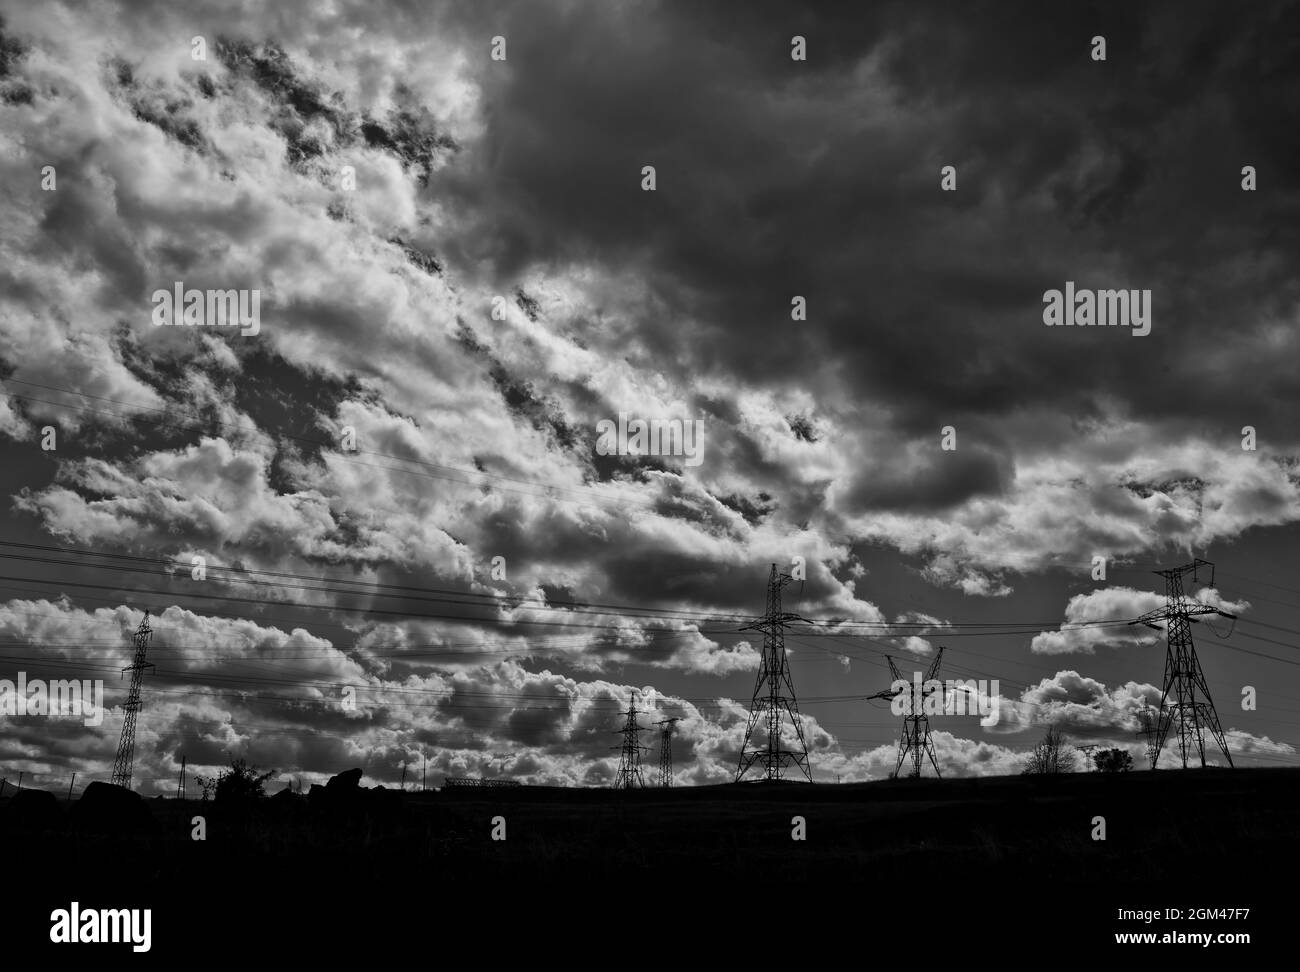 Grayscale shot of transmission towers under the sunlight and a cloudy sky Stock Photo